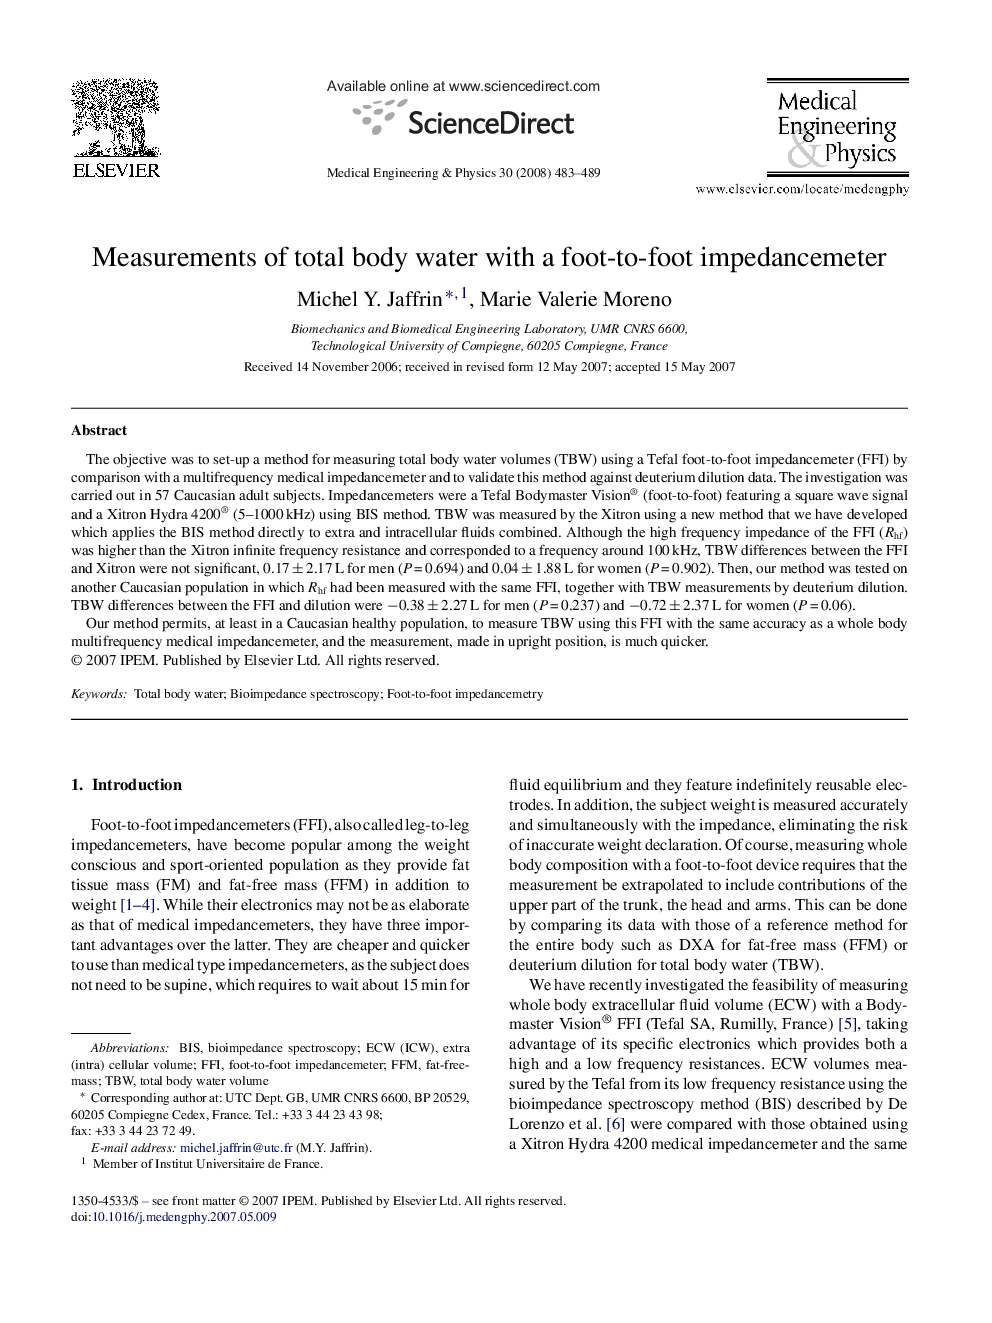 Measurements of total body water with a foot-to-foot impedancemeter